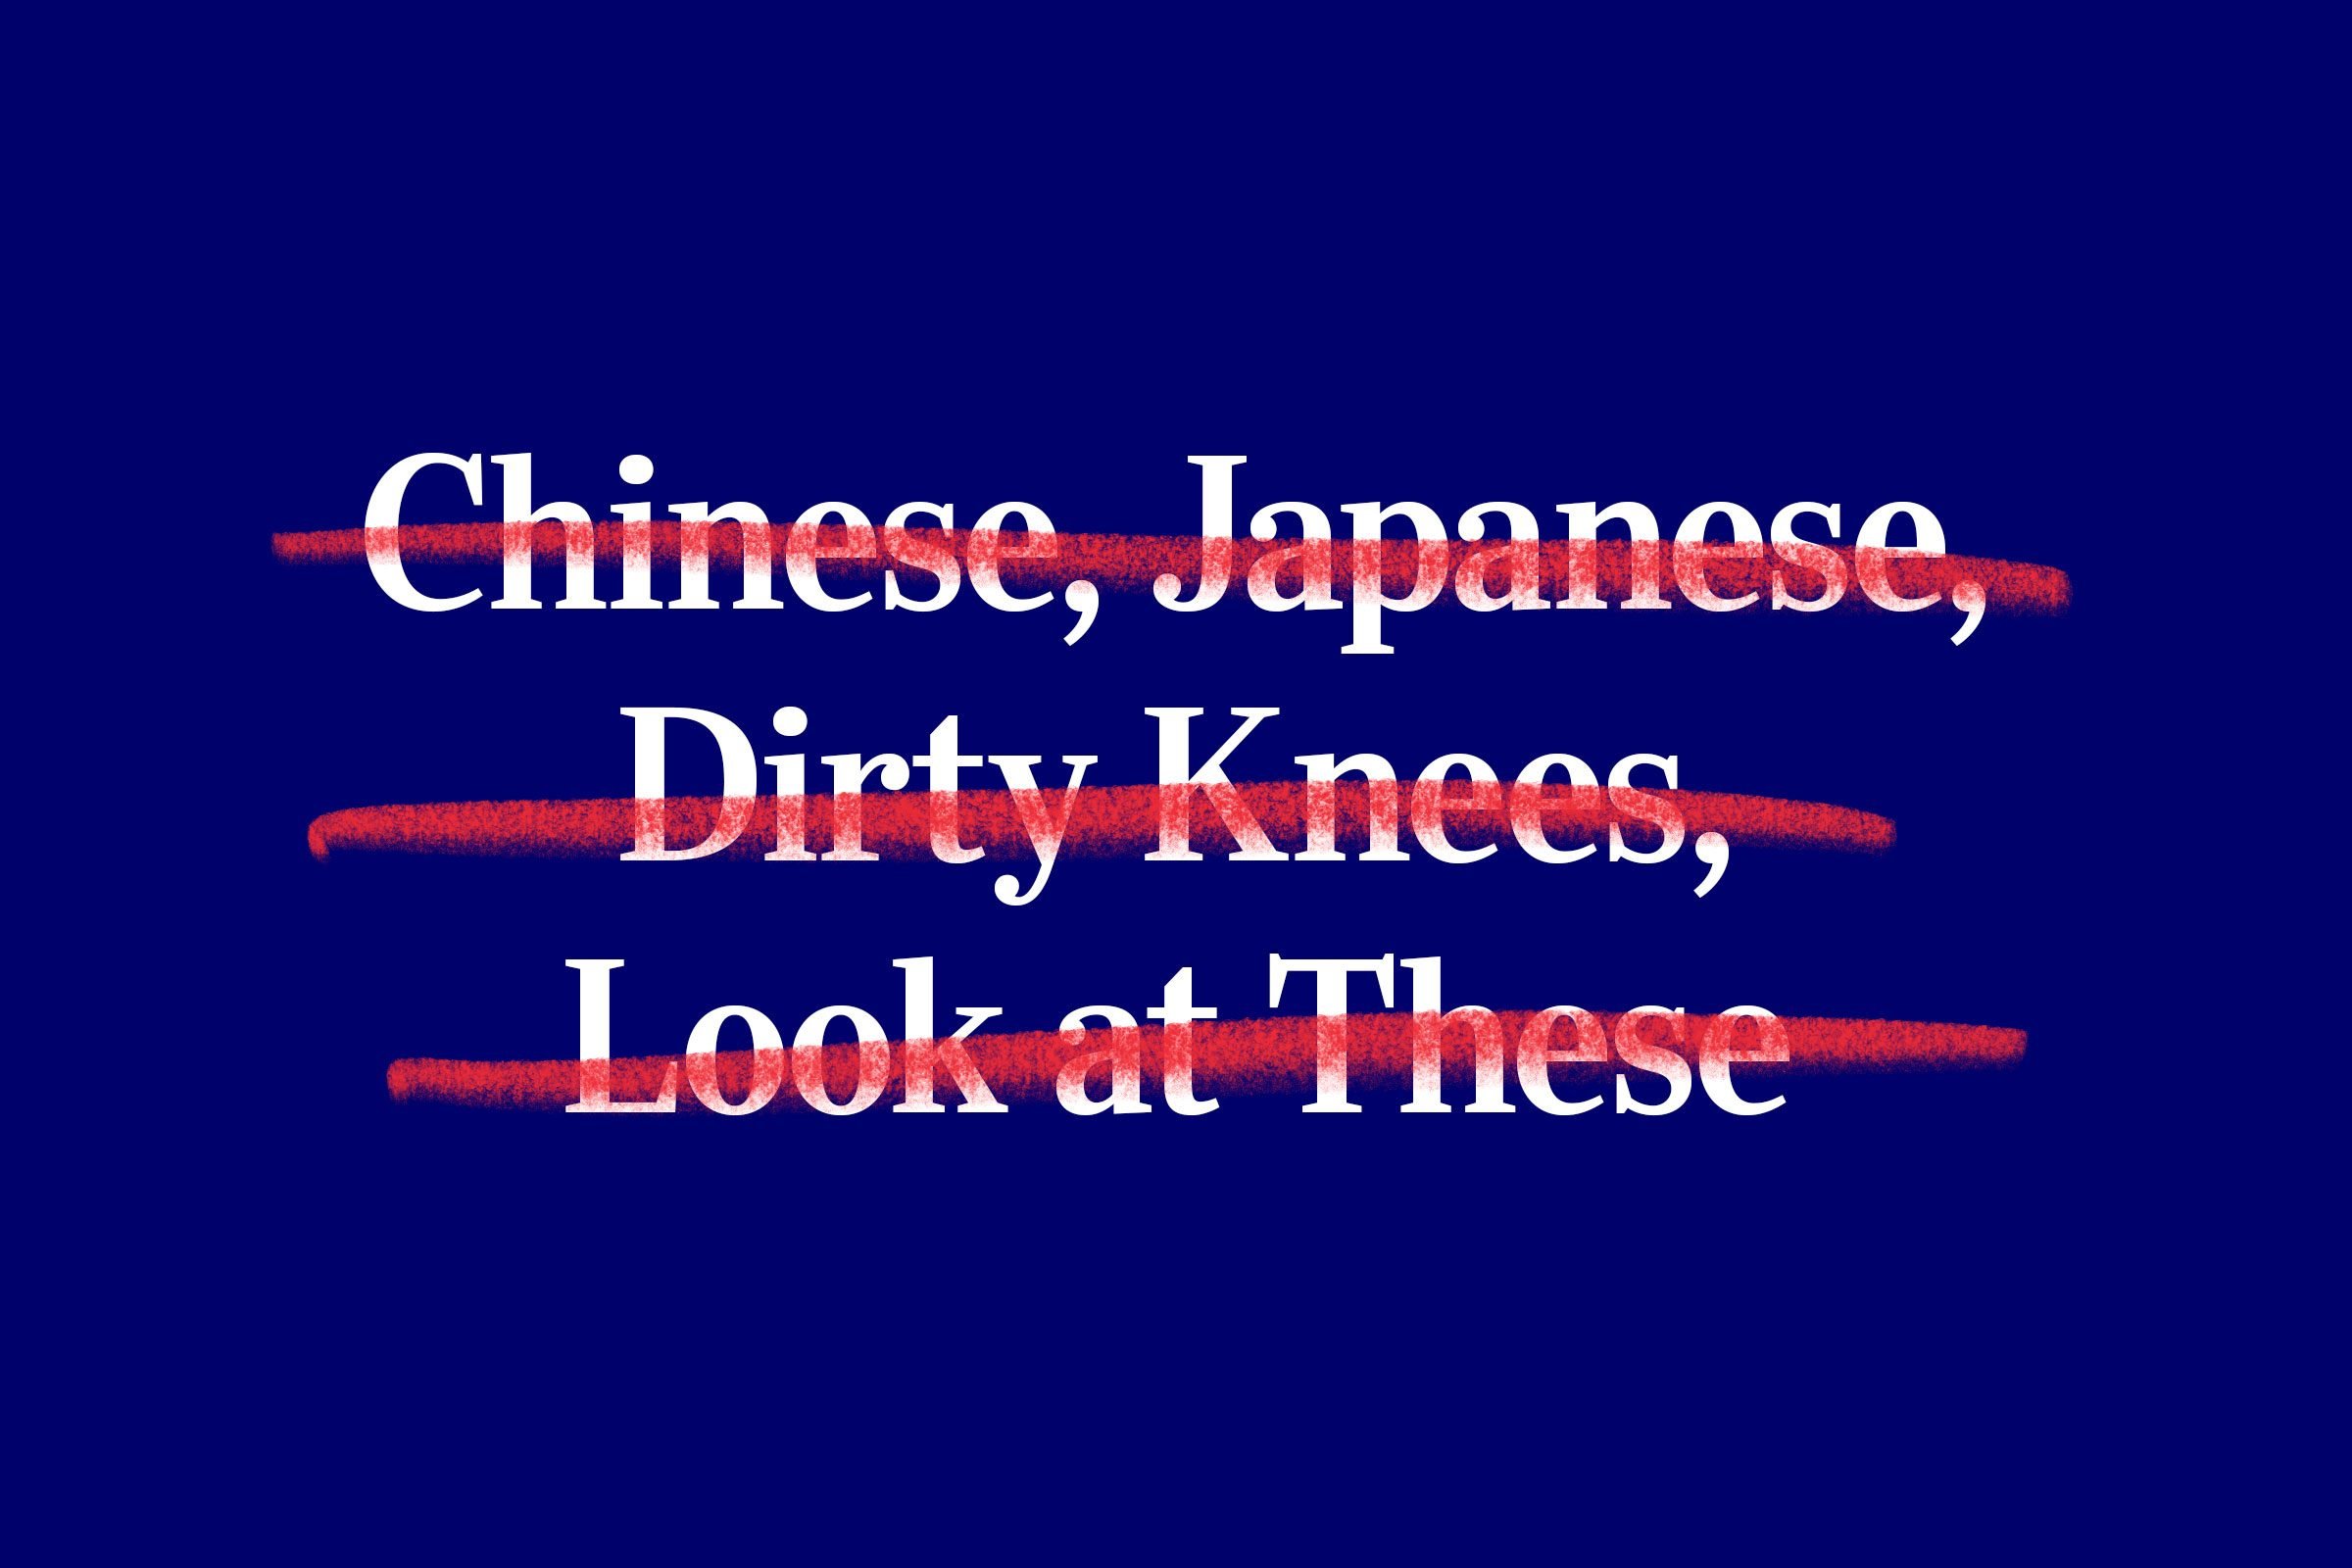 nursery rhyme title (Chinese, Japanese, Dirty Knees, Look at These) with red strikethrough overlay